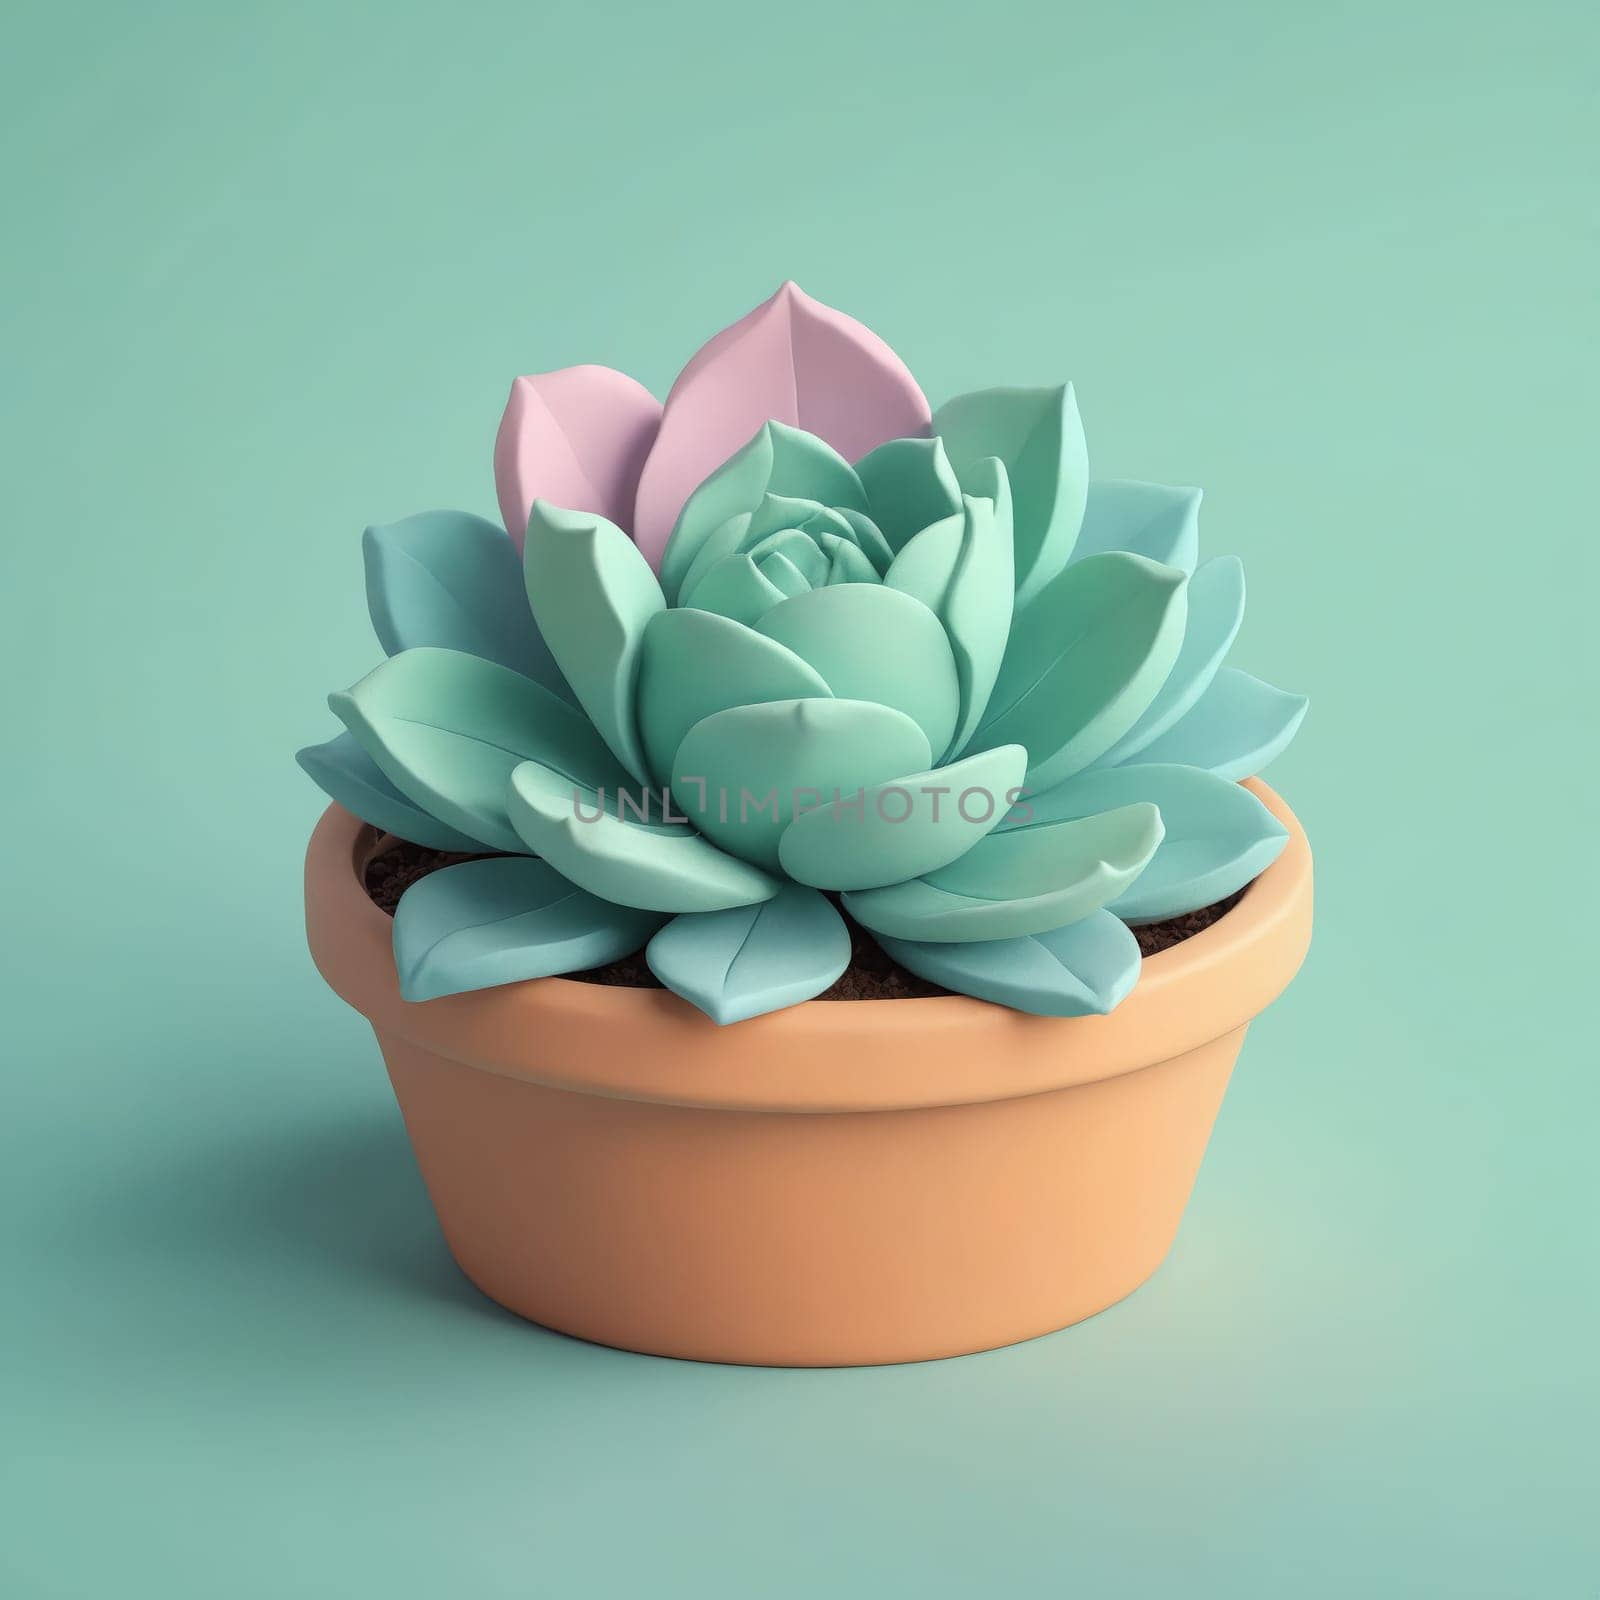 A flowering plant in a ceramic flowerpot on an electric blue background by Andre1ns